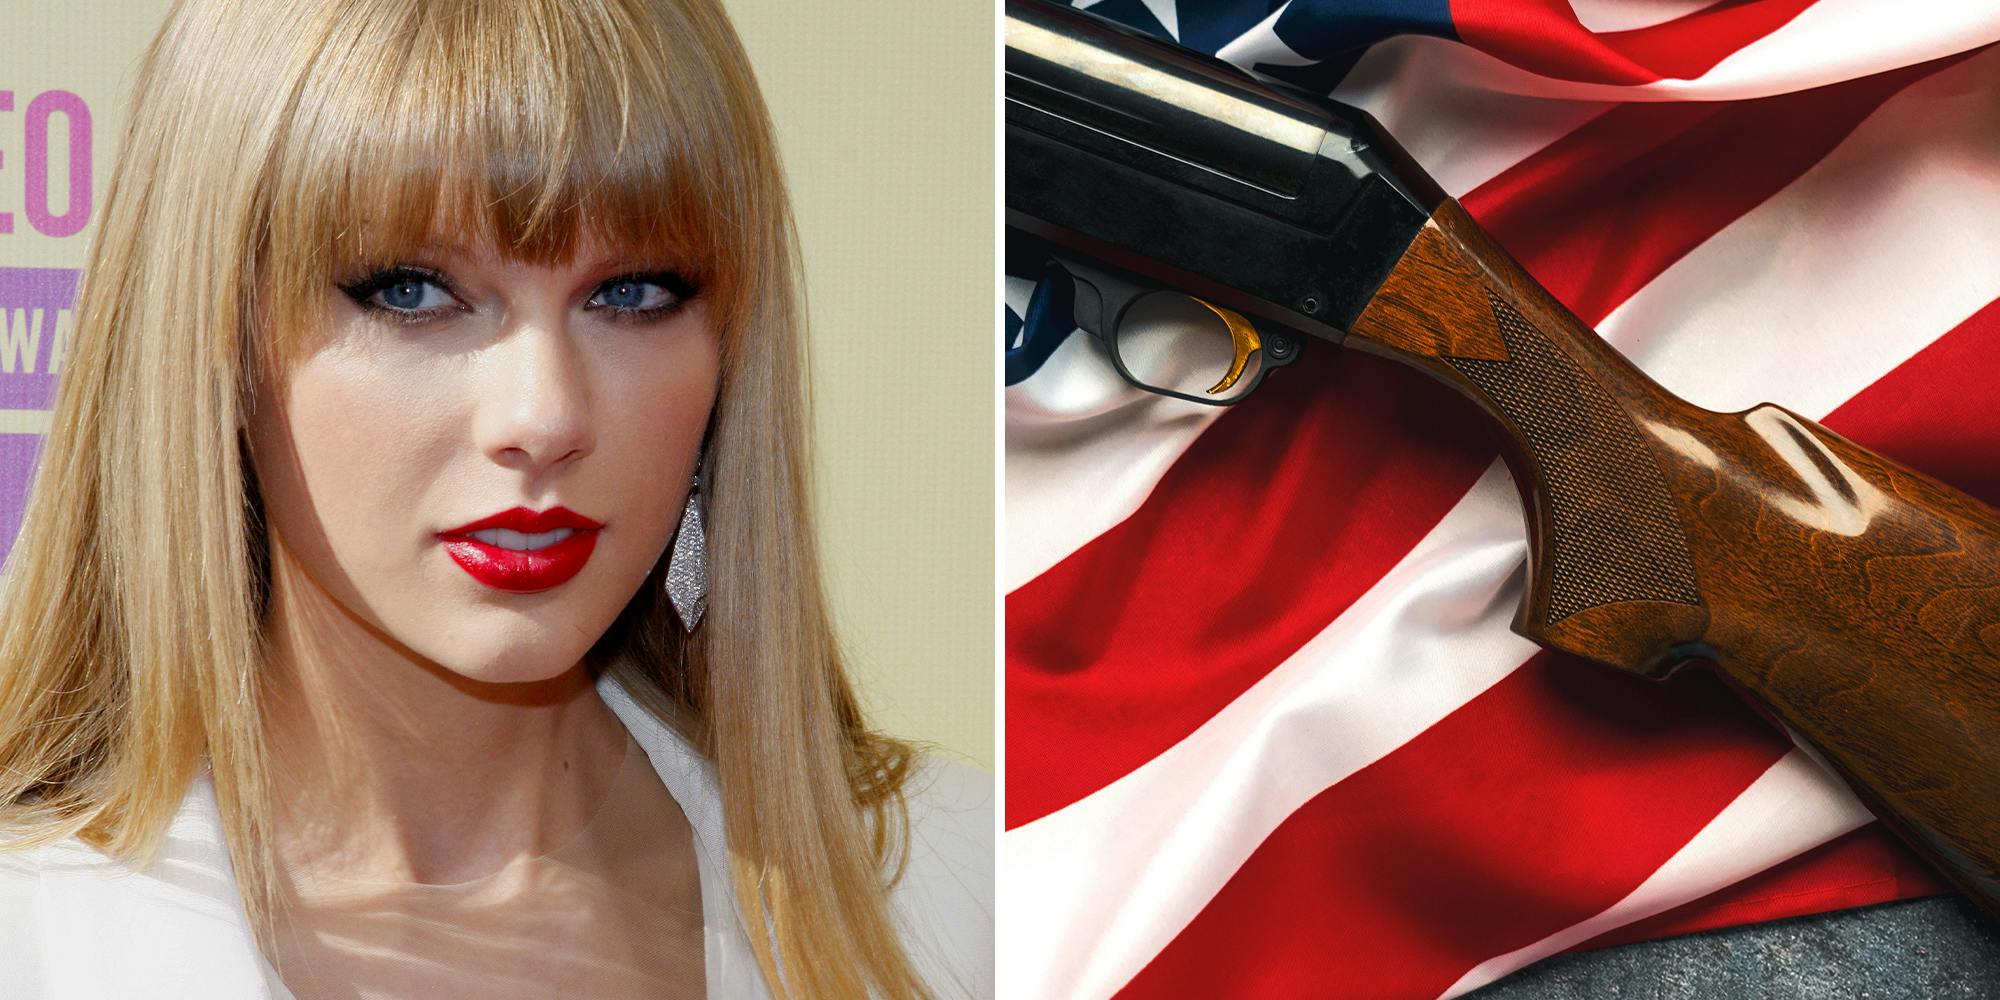 Conspiracy theorists immediately claim Chiefs' parade shooting orchestrated so Taylor Swift can push gun control